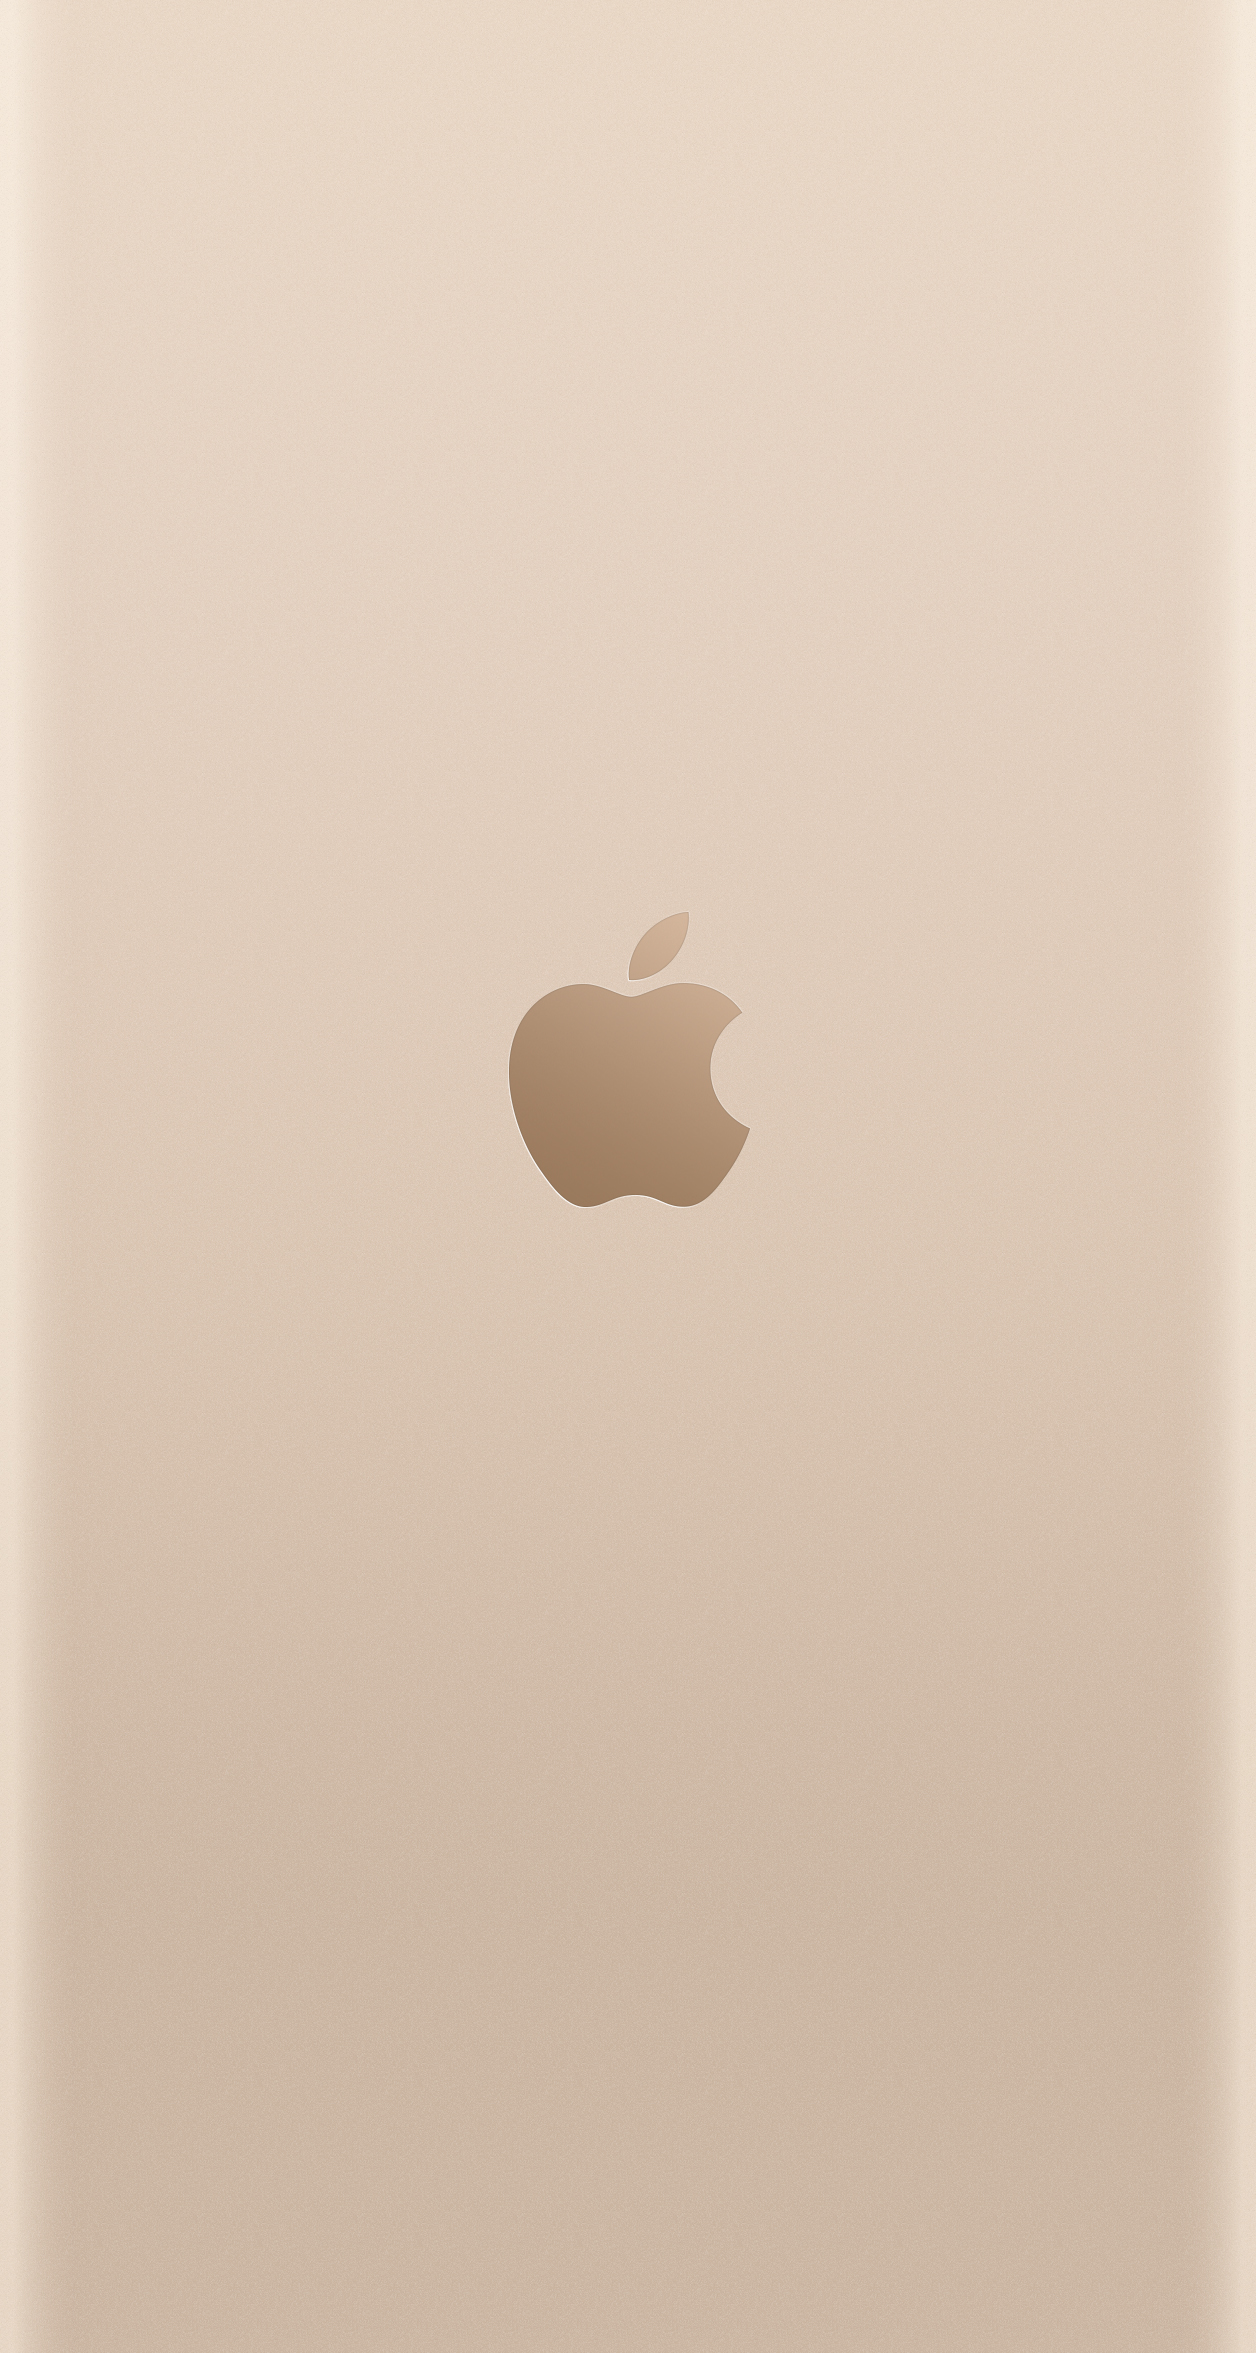 Apple Logo Wallpaper For Iphone 6 And Iphone 6 Plus Total Update